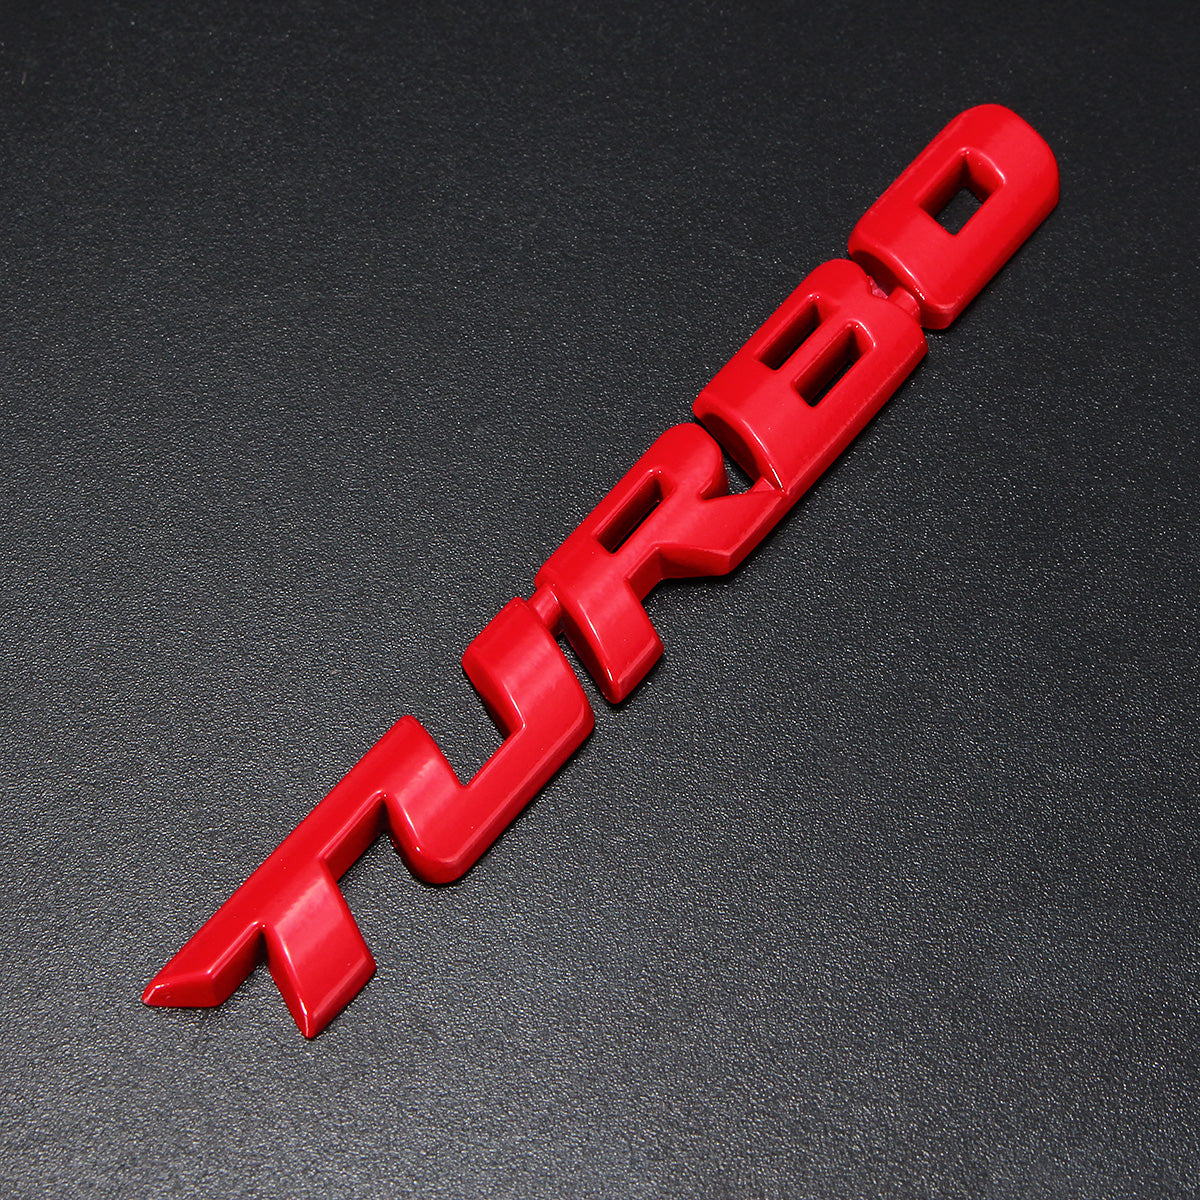 Red Turbo 3D Metal Car Decals Lettering Badge Sticker for Auto Body Rear Tailgate